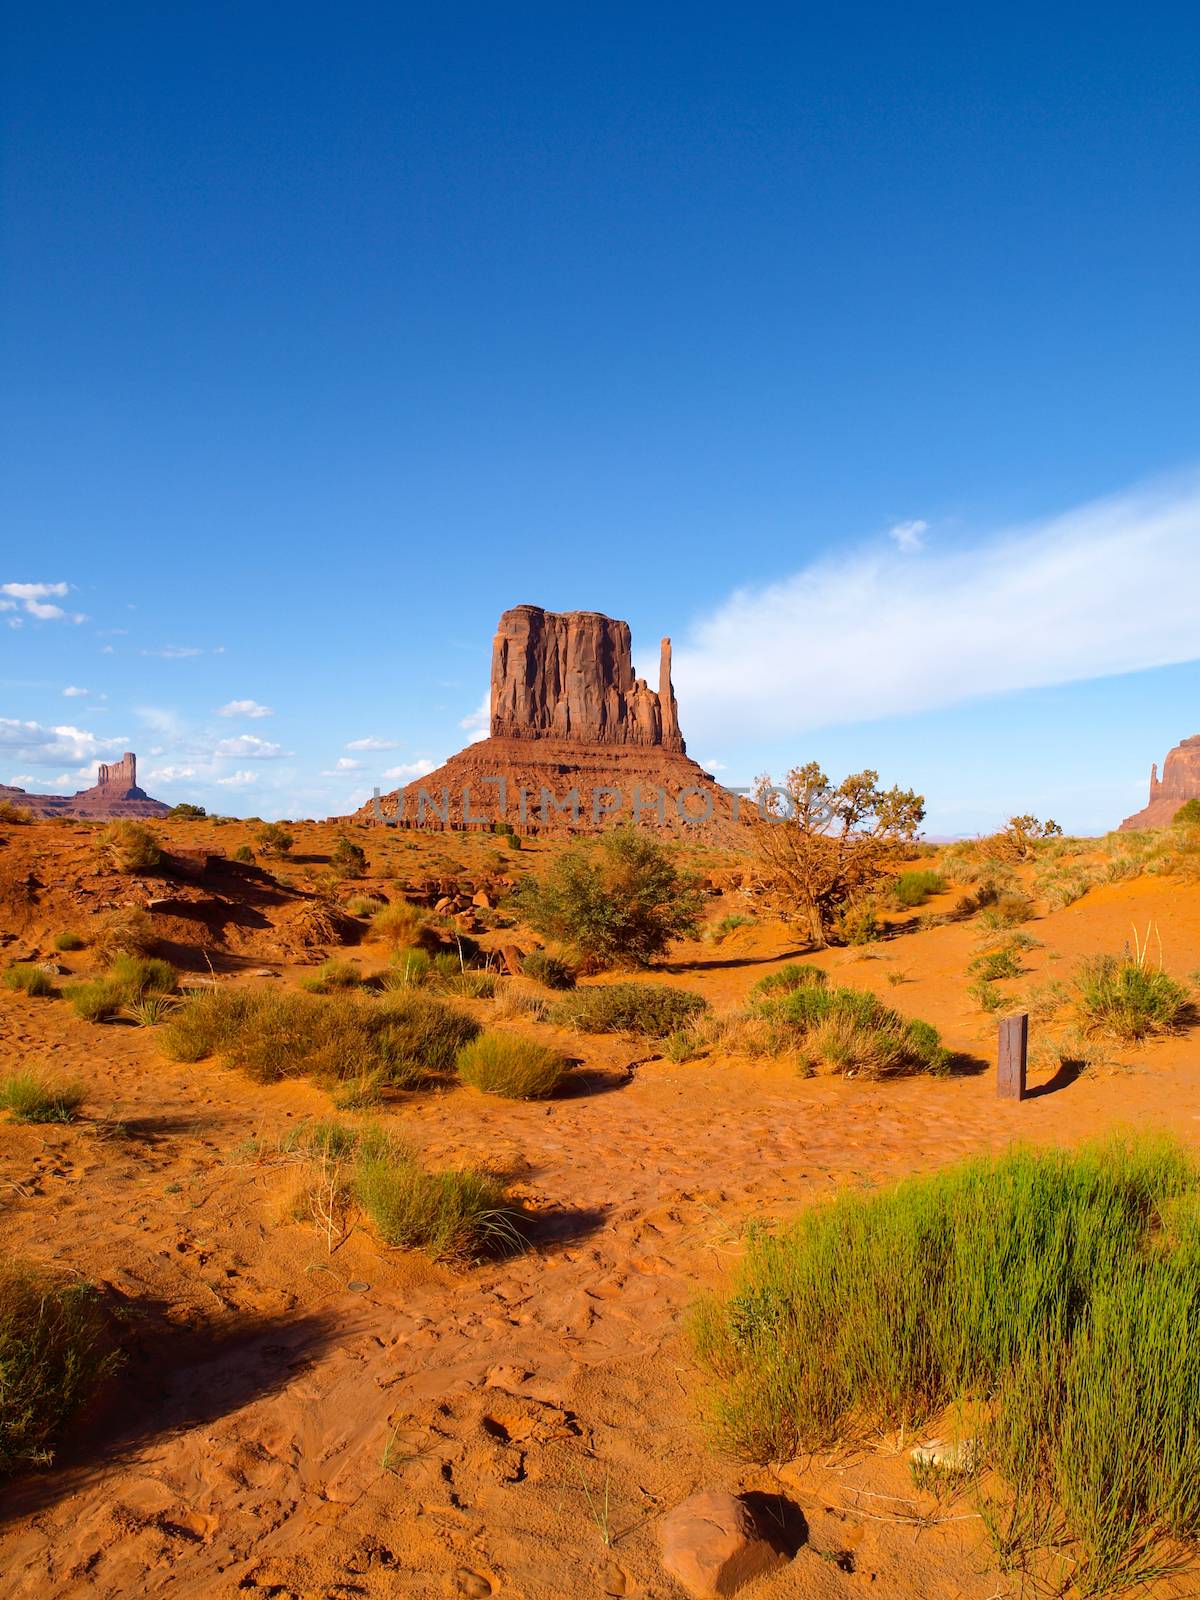 Orange rock formations of Monument Valley (Utah, USA)